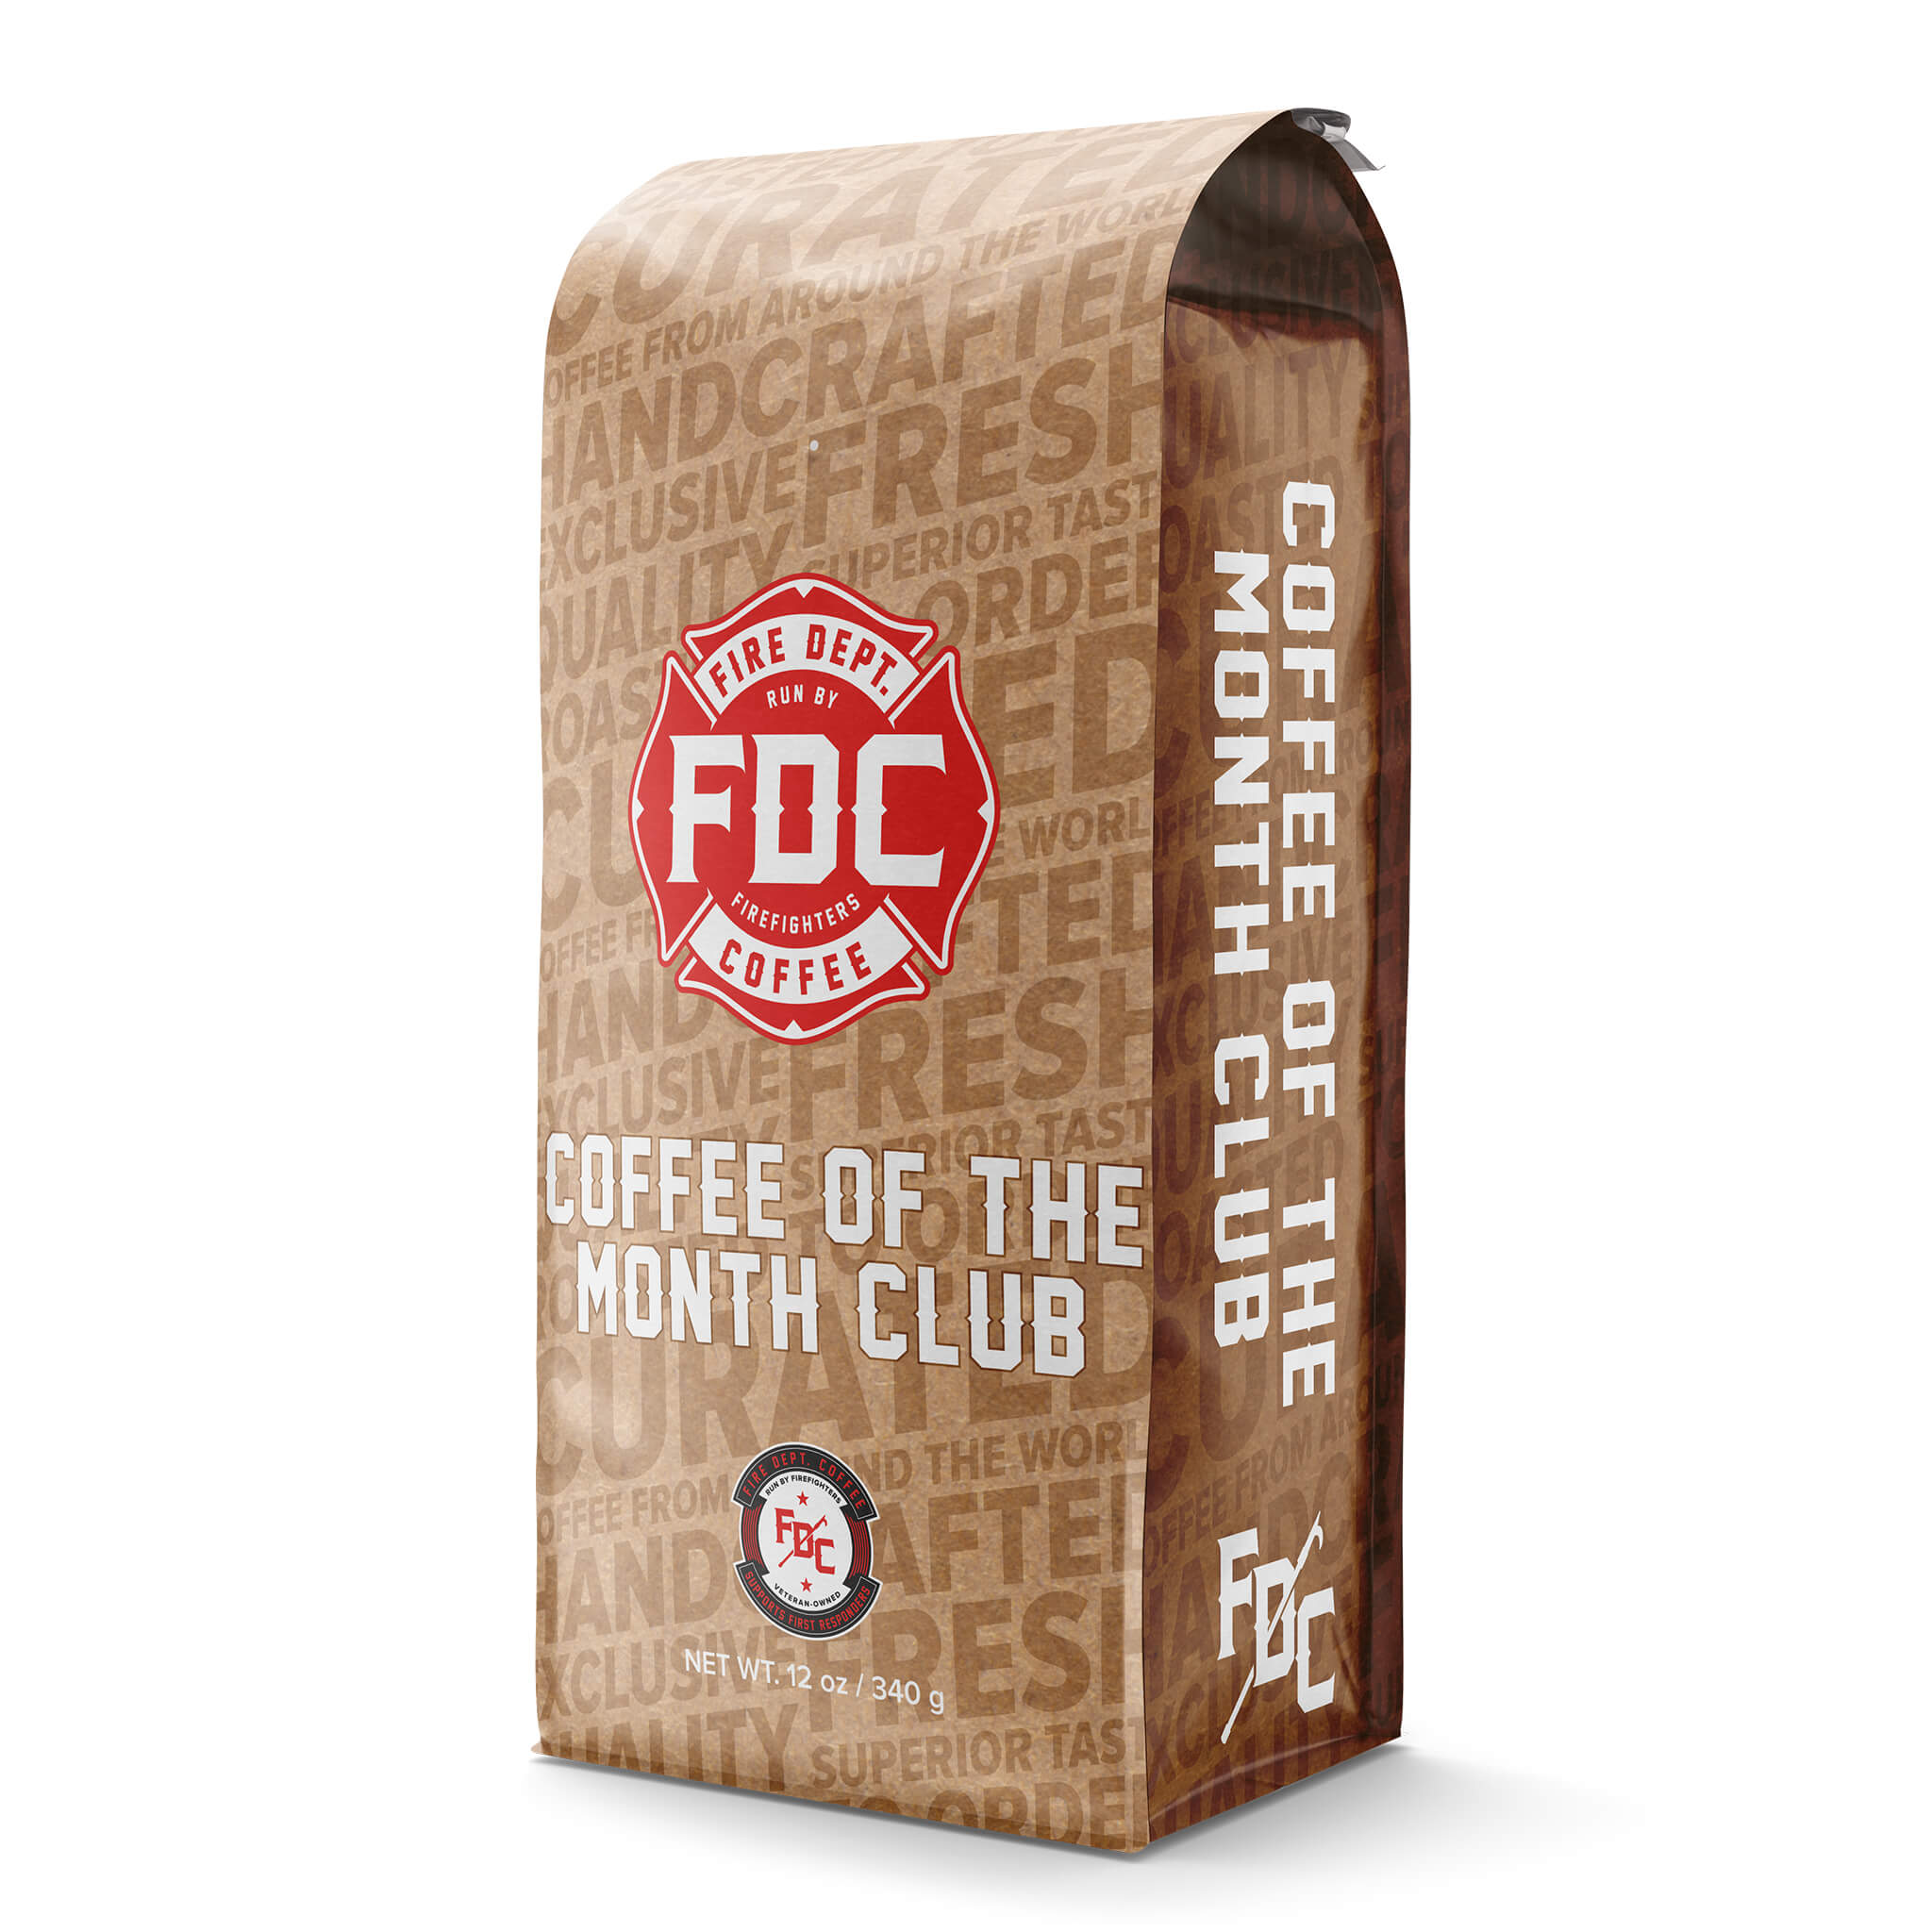 Bag of the Coffee of the Month